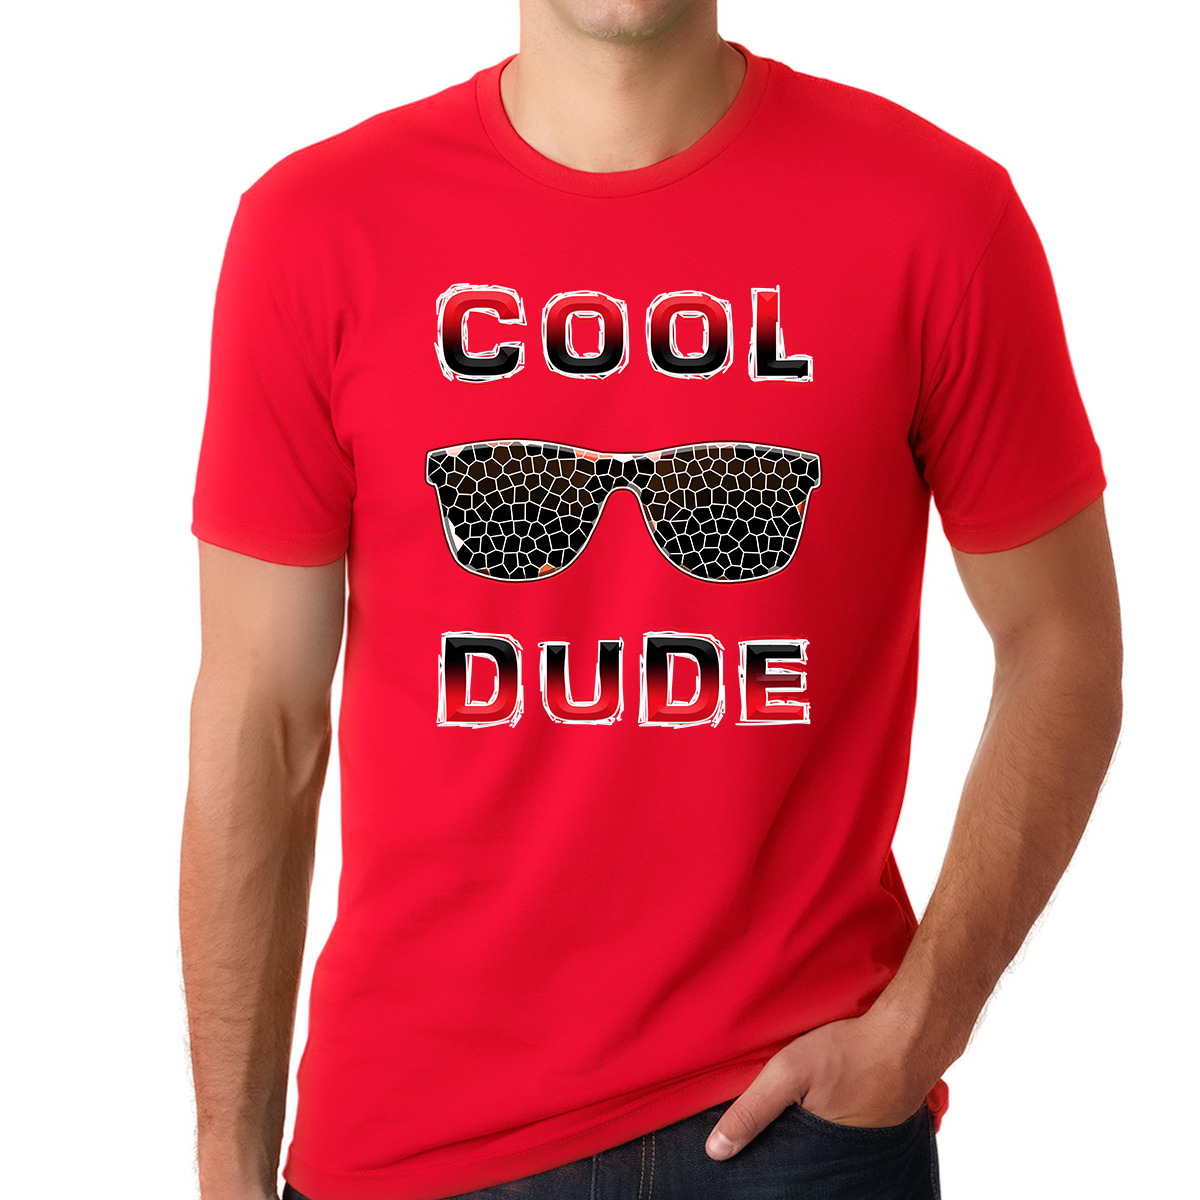 Red Cool Dude Shirts for MEN - Perfect Dude Shirt for MEN - Perfect Dude Merchandise - Fire Fit Designs